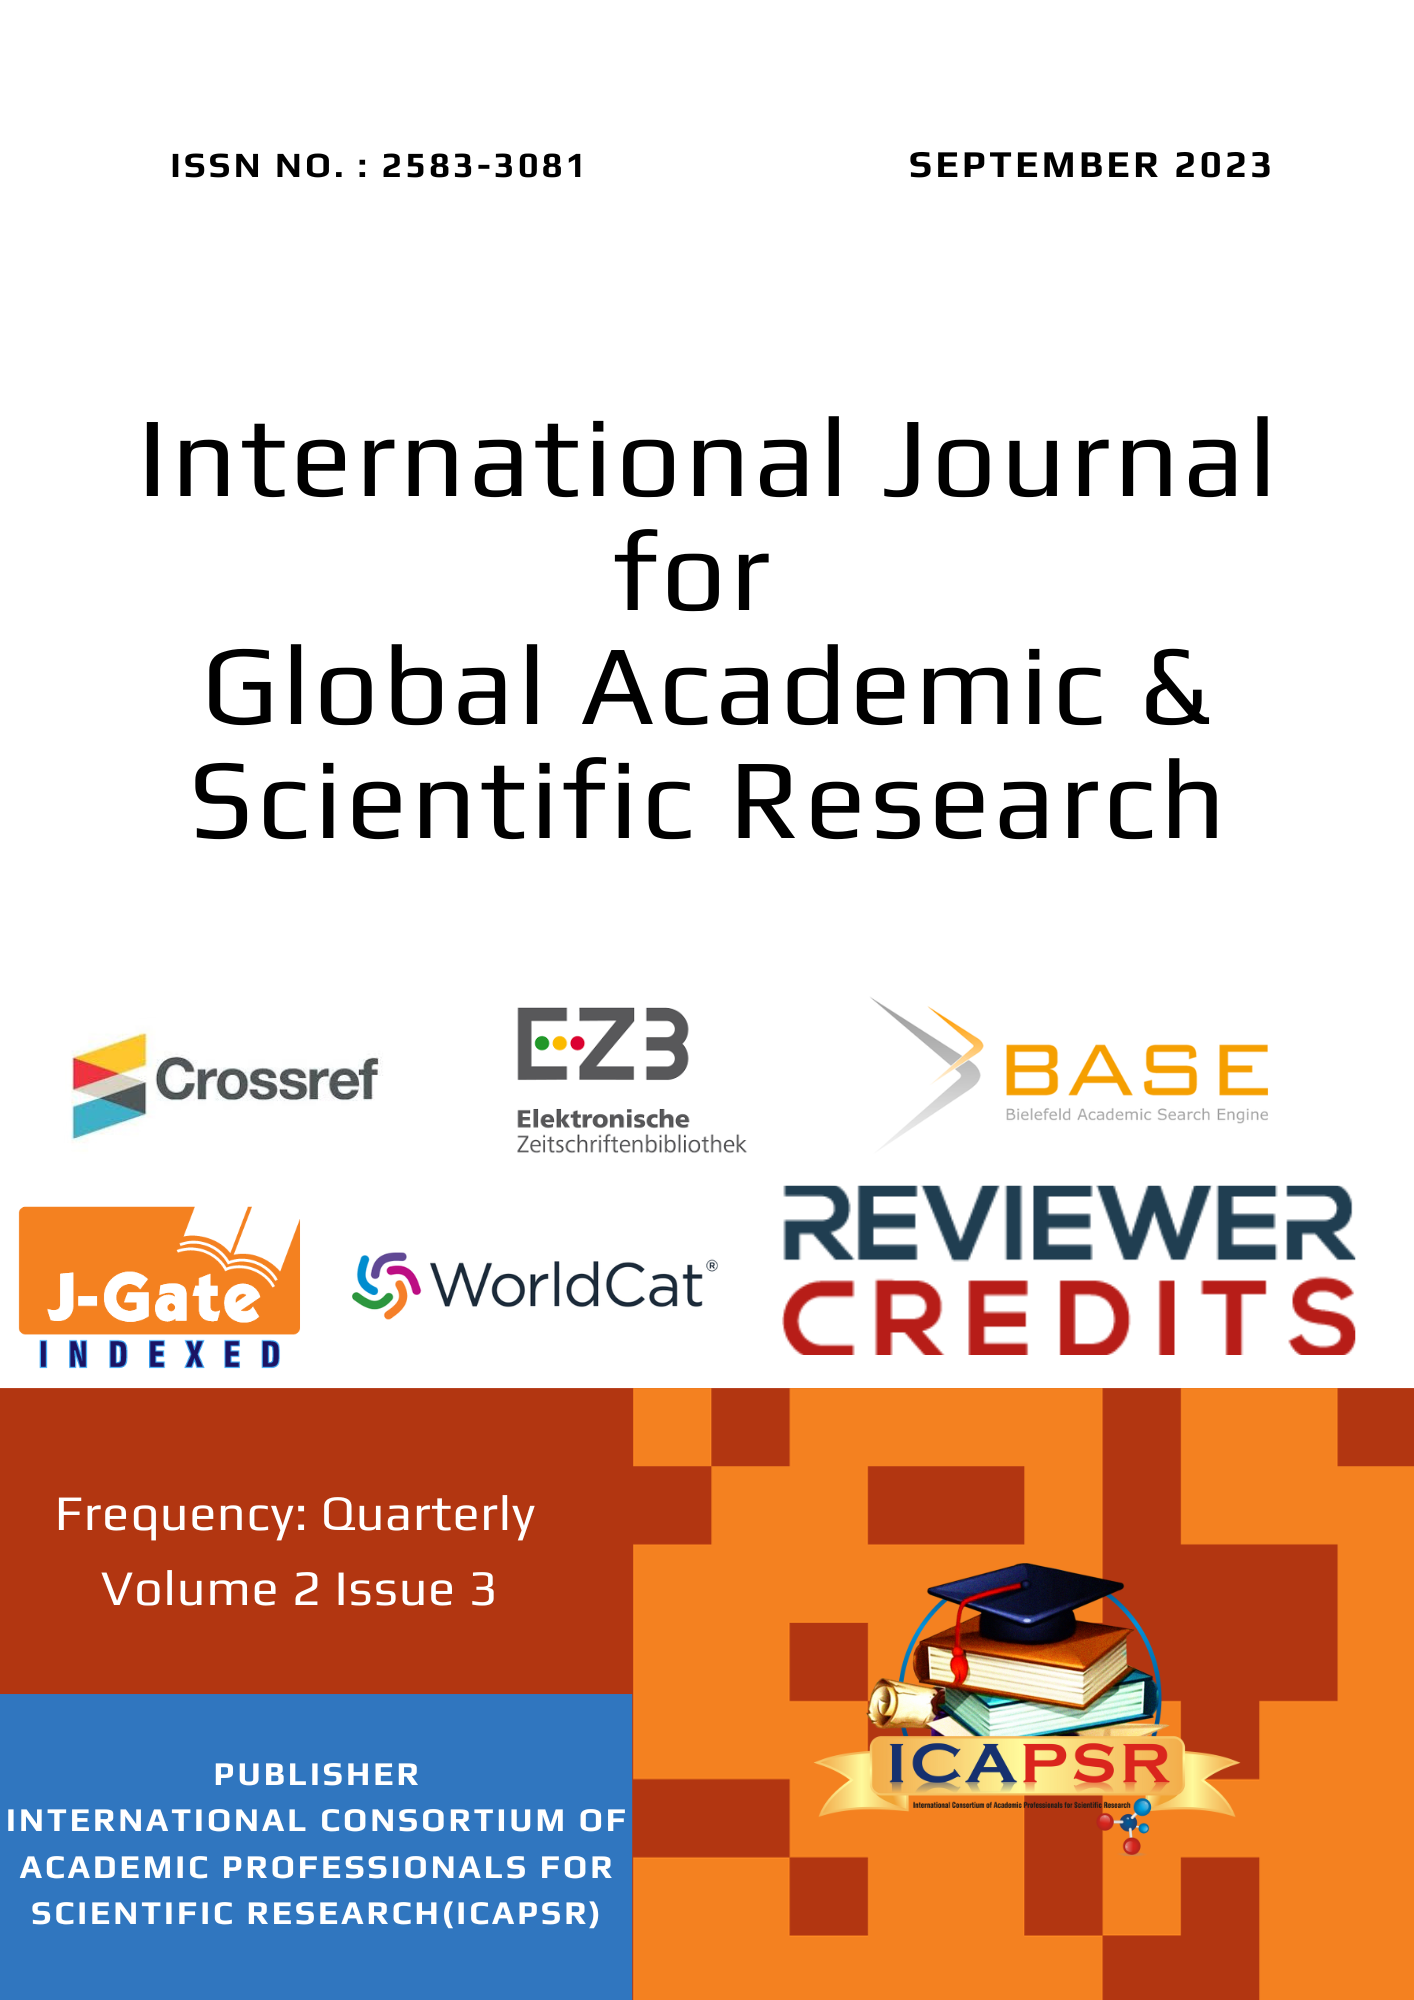 					View Vol. 2 No. 3 (2023): Vol. 2 No. 3 (2023): International Journal for Global Academic & Scientific Research
				